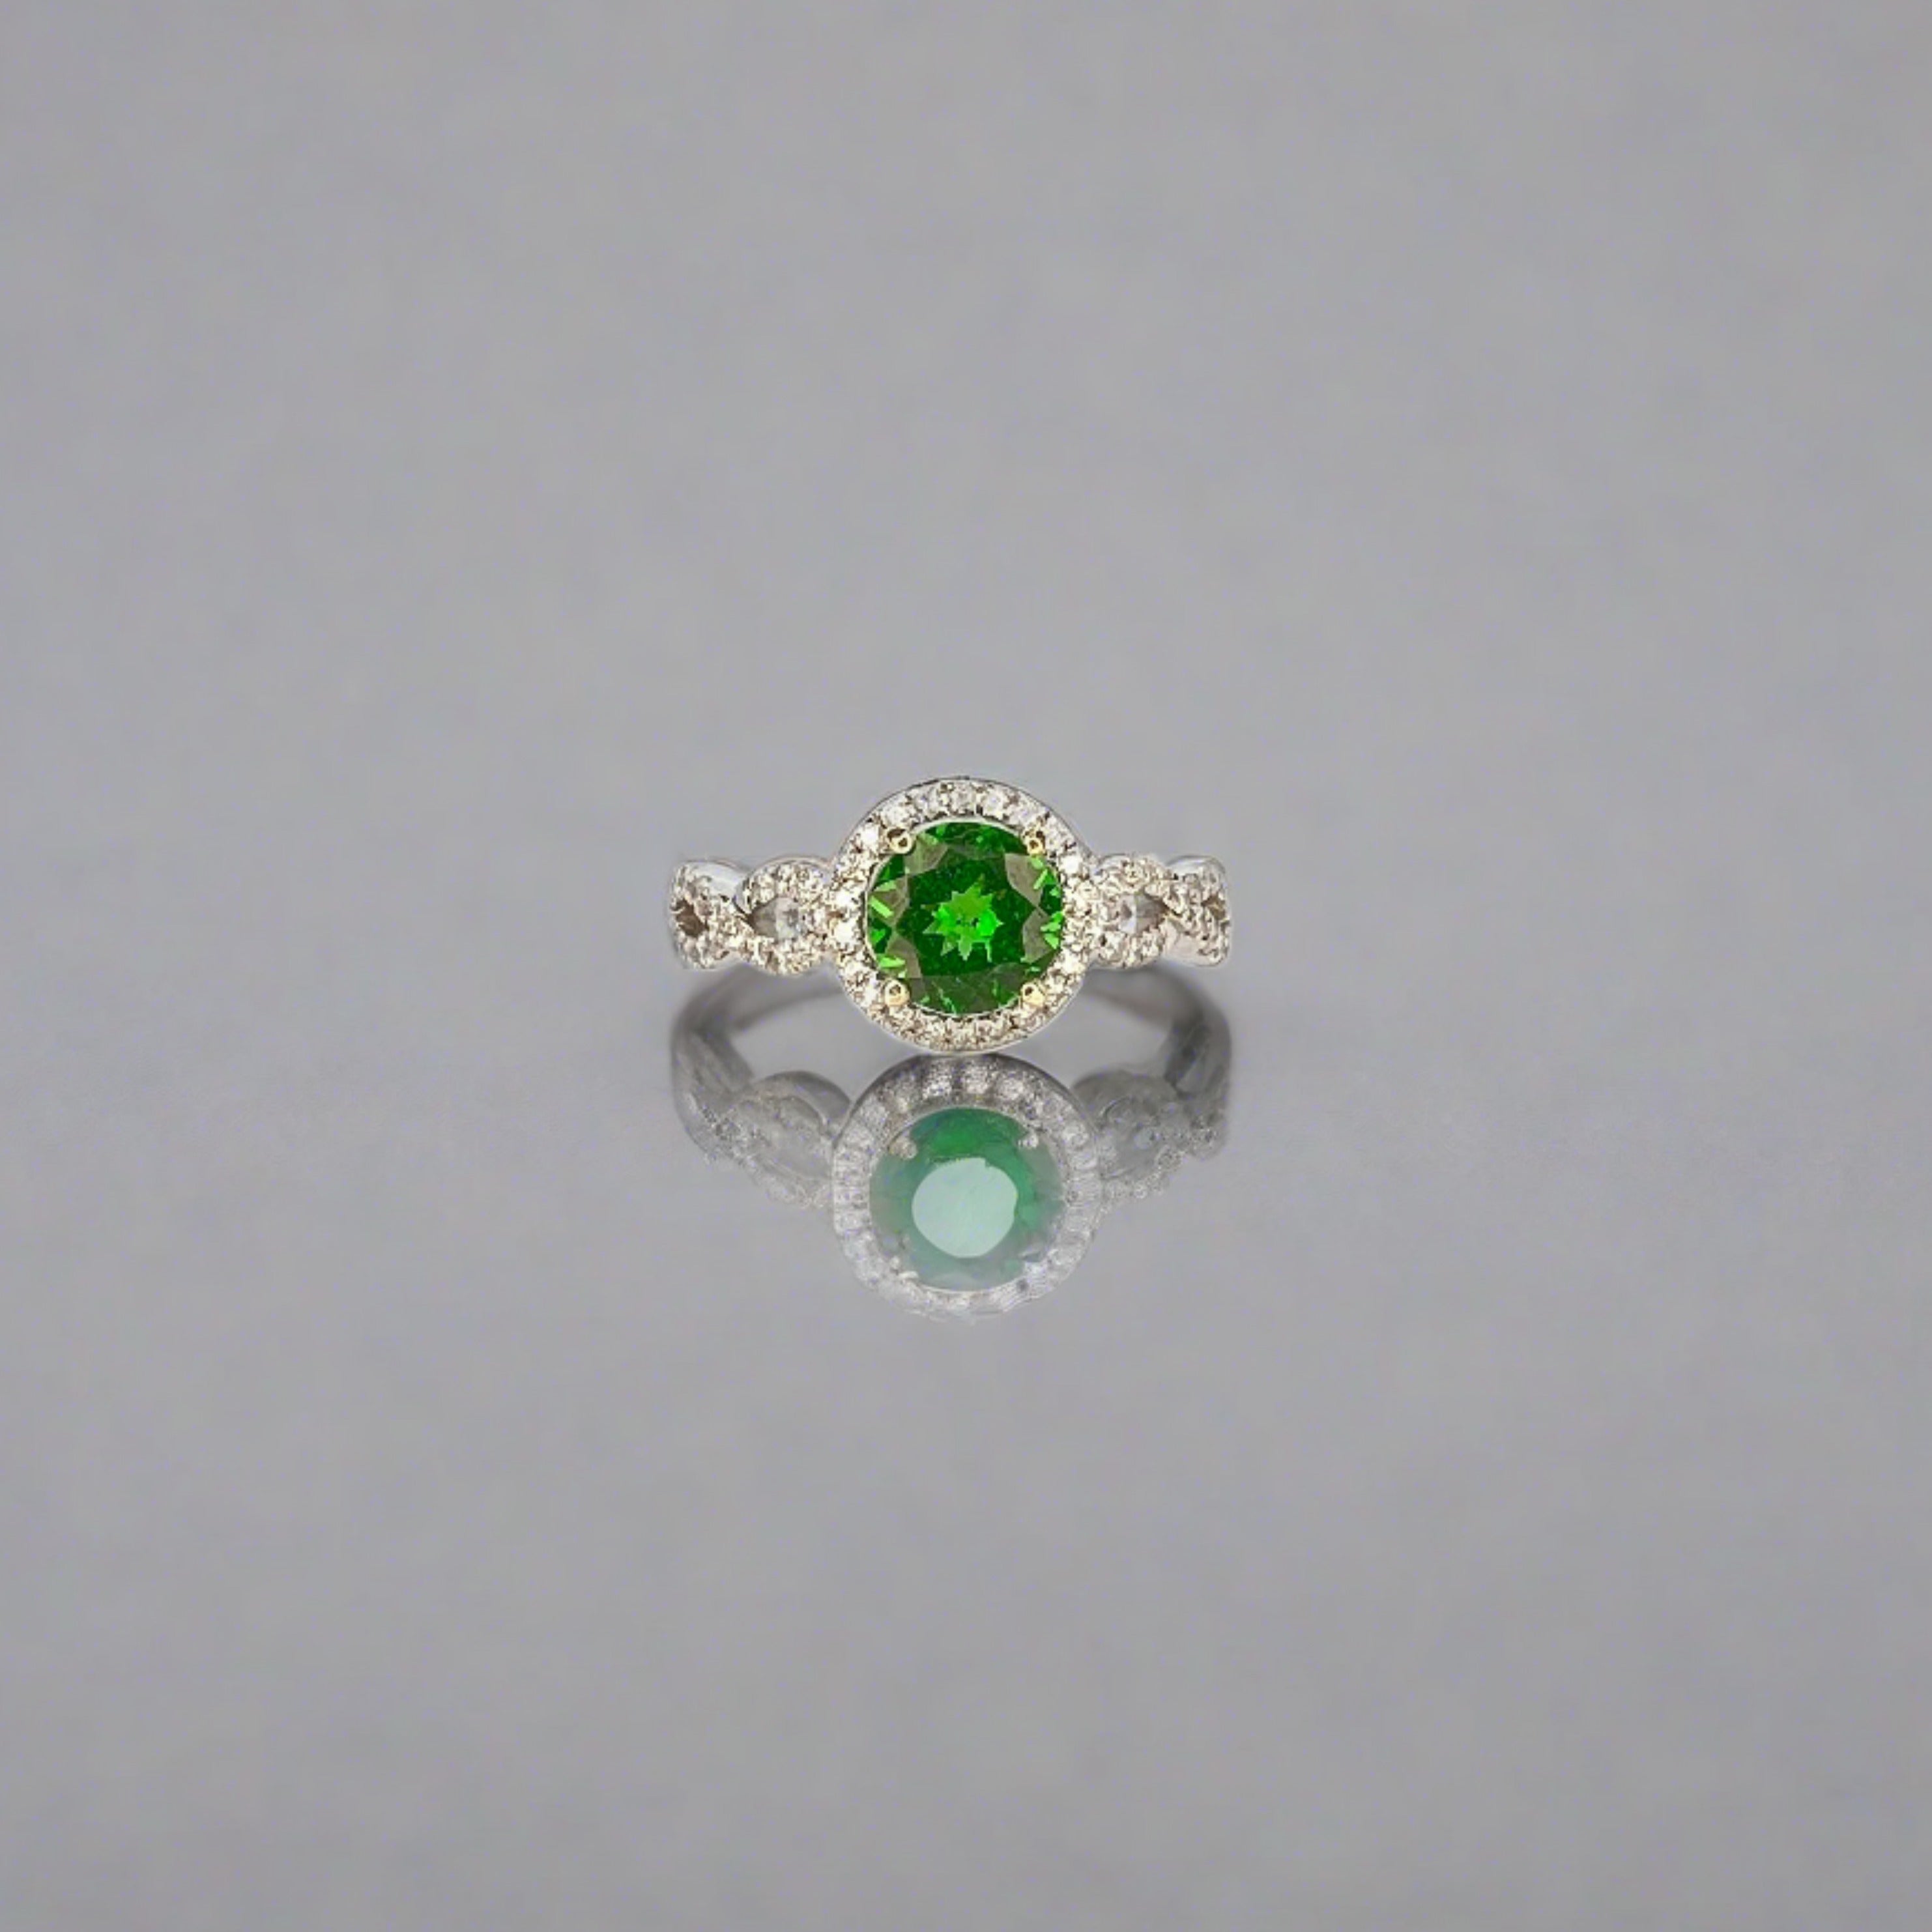 Vivid Green Tsavorite Garnet Ring in 14K white gold twisted setting with a halo